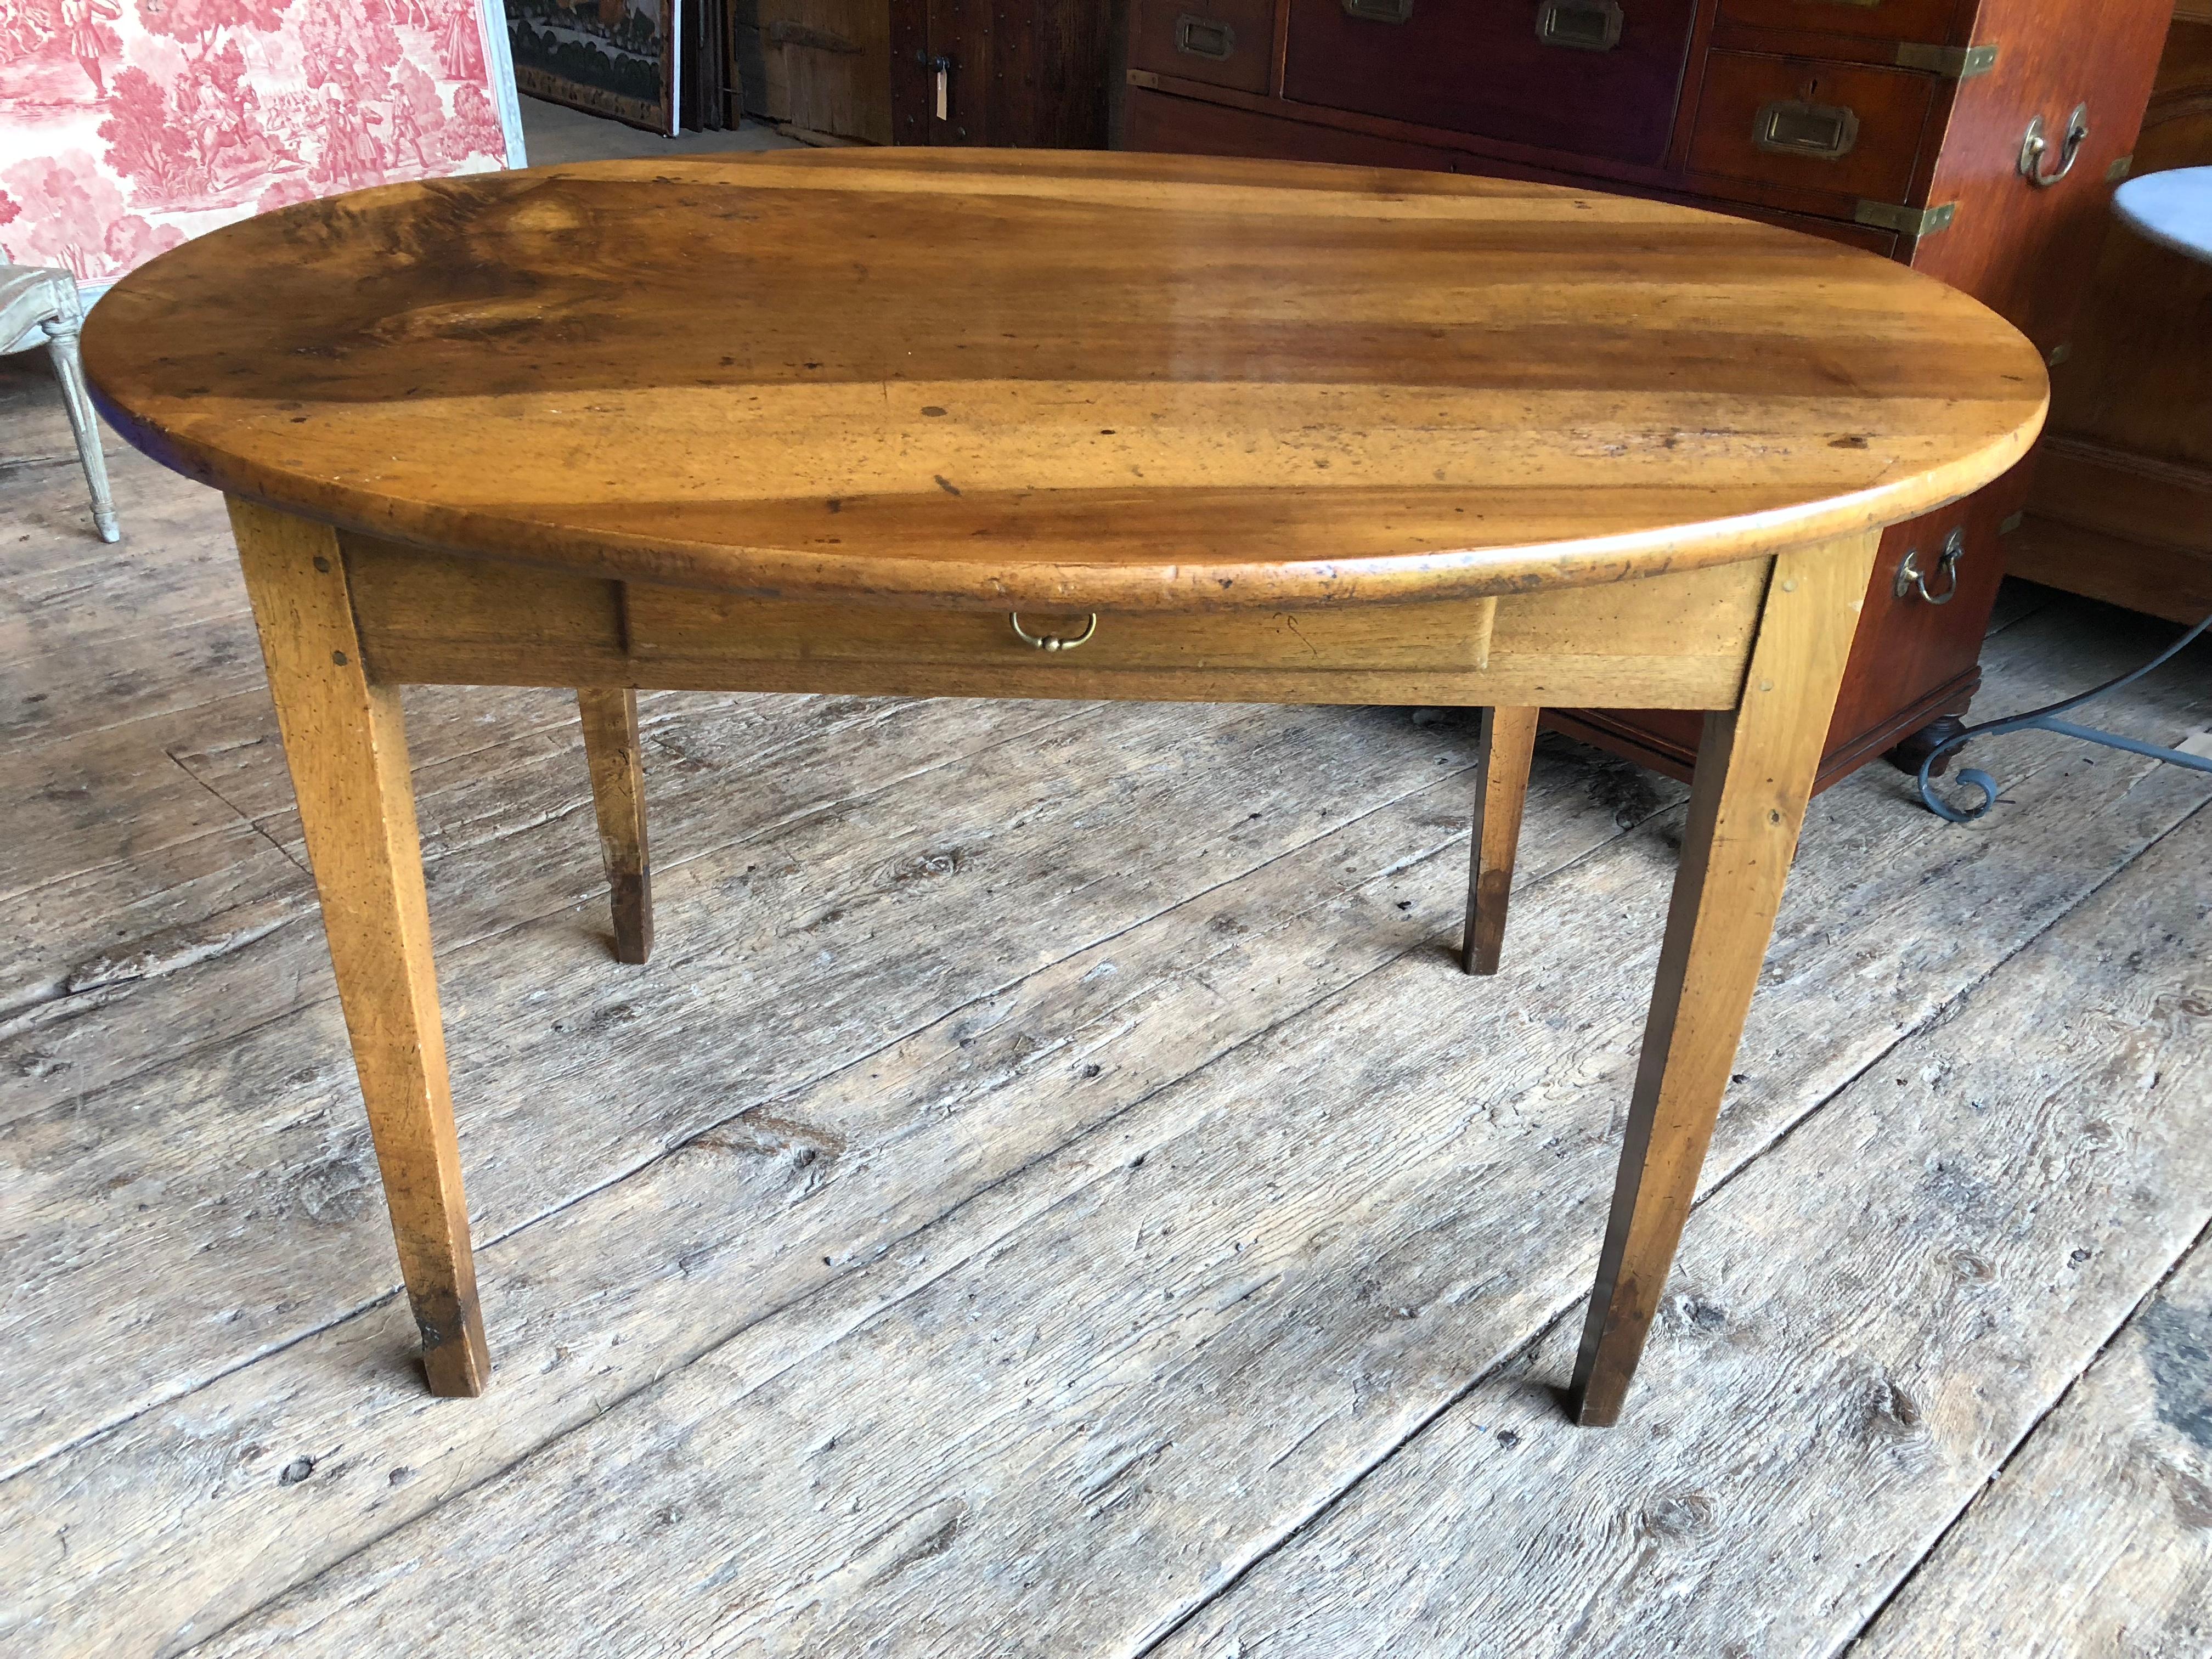 An oval breakfast table or writing table in walnut with one drawer and simple tapered legs from France, circa 1850. Nice patina and great size for an apartment or guest room.